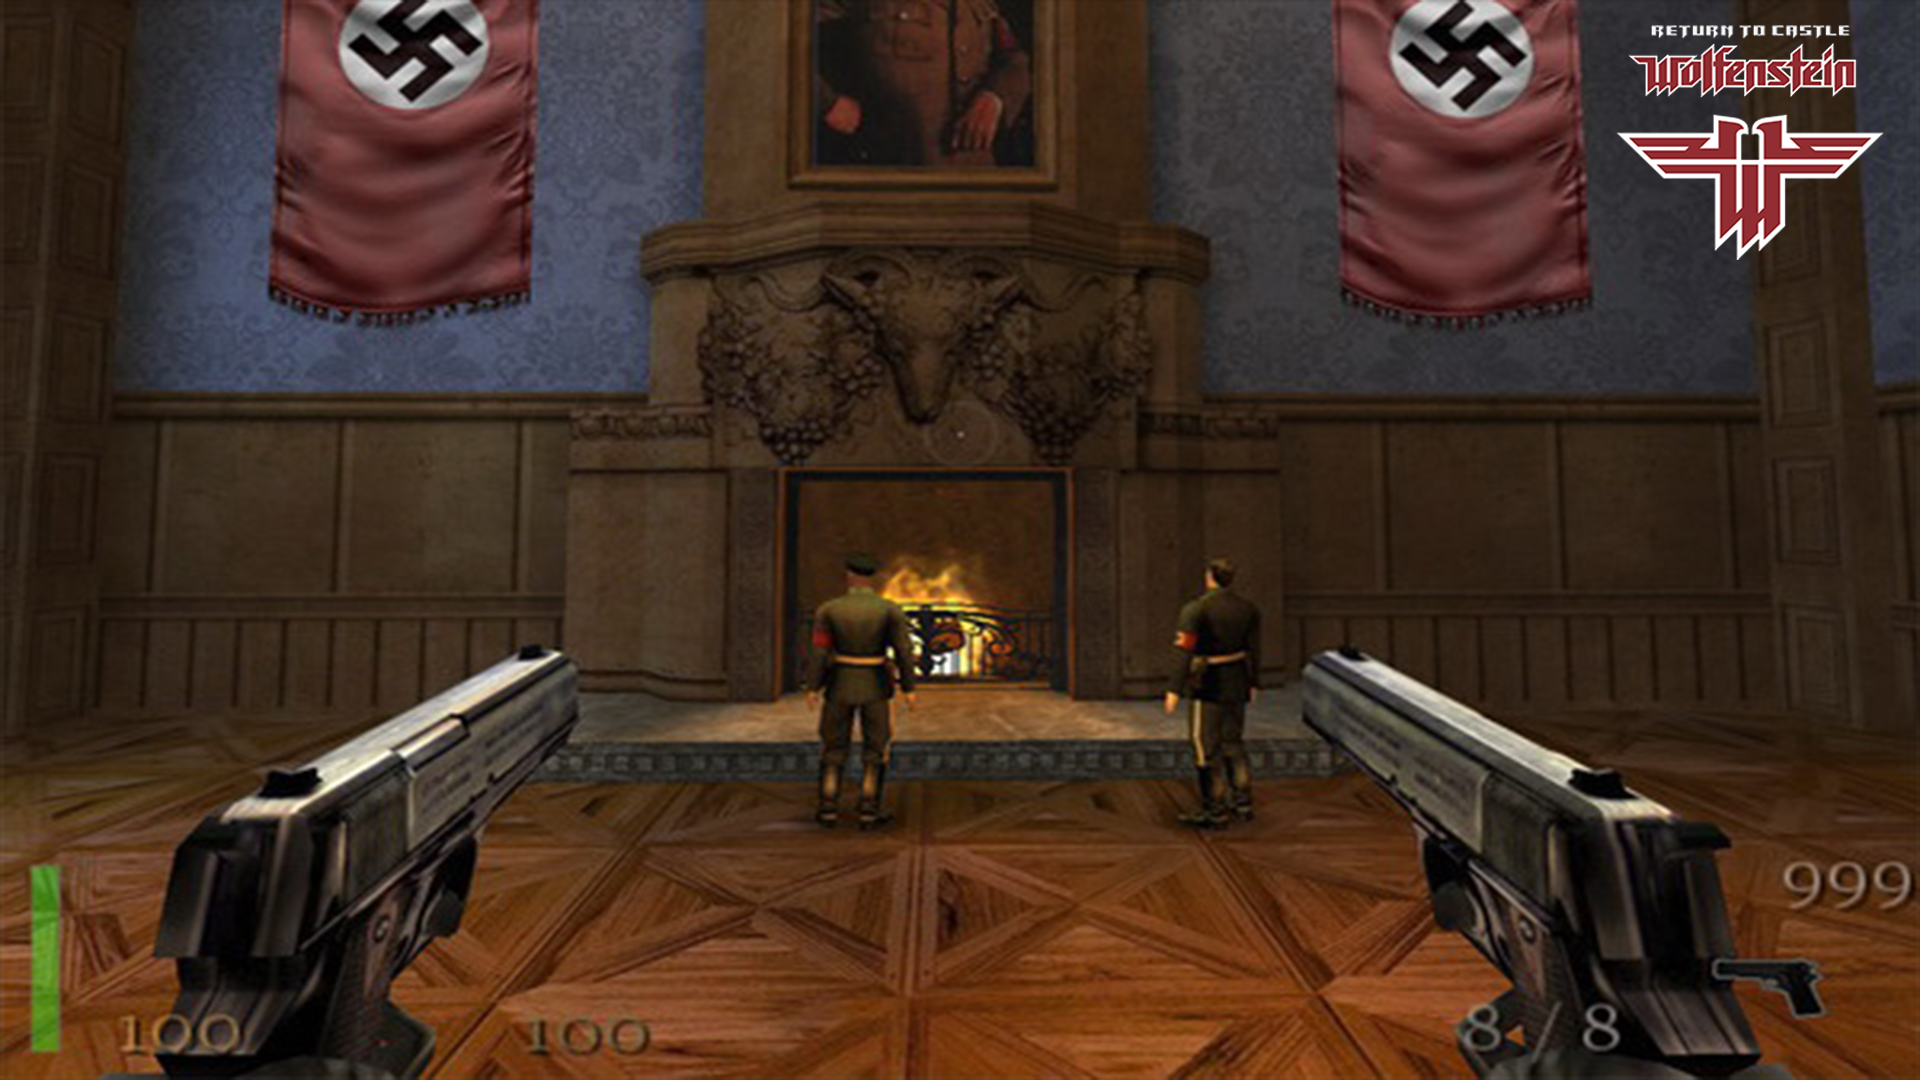 return-to-castle-wolfenstein-picture-image-abyss